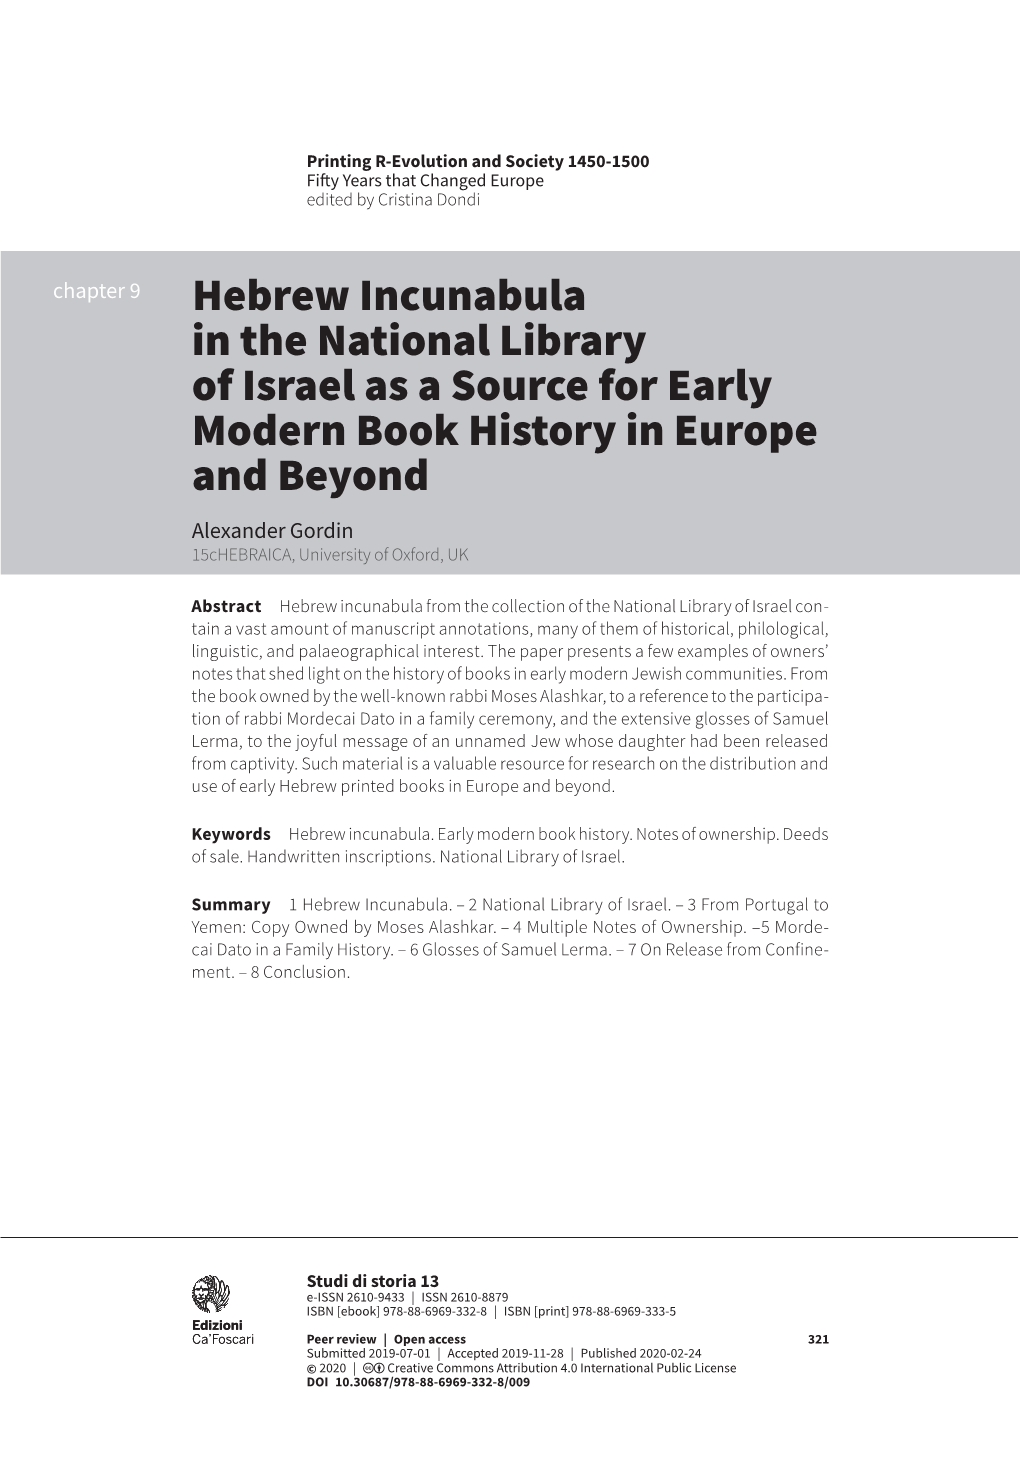 Hebrew Incunabula in the National Library of Israel As a Source For